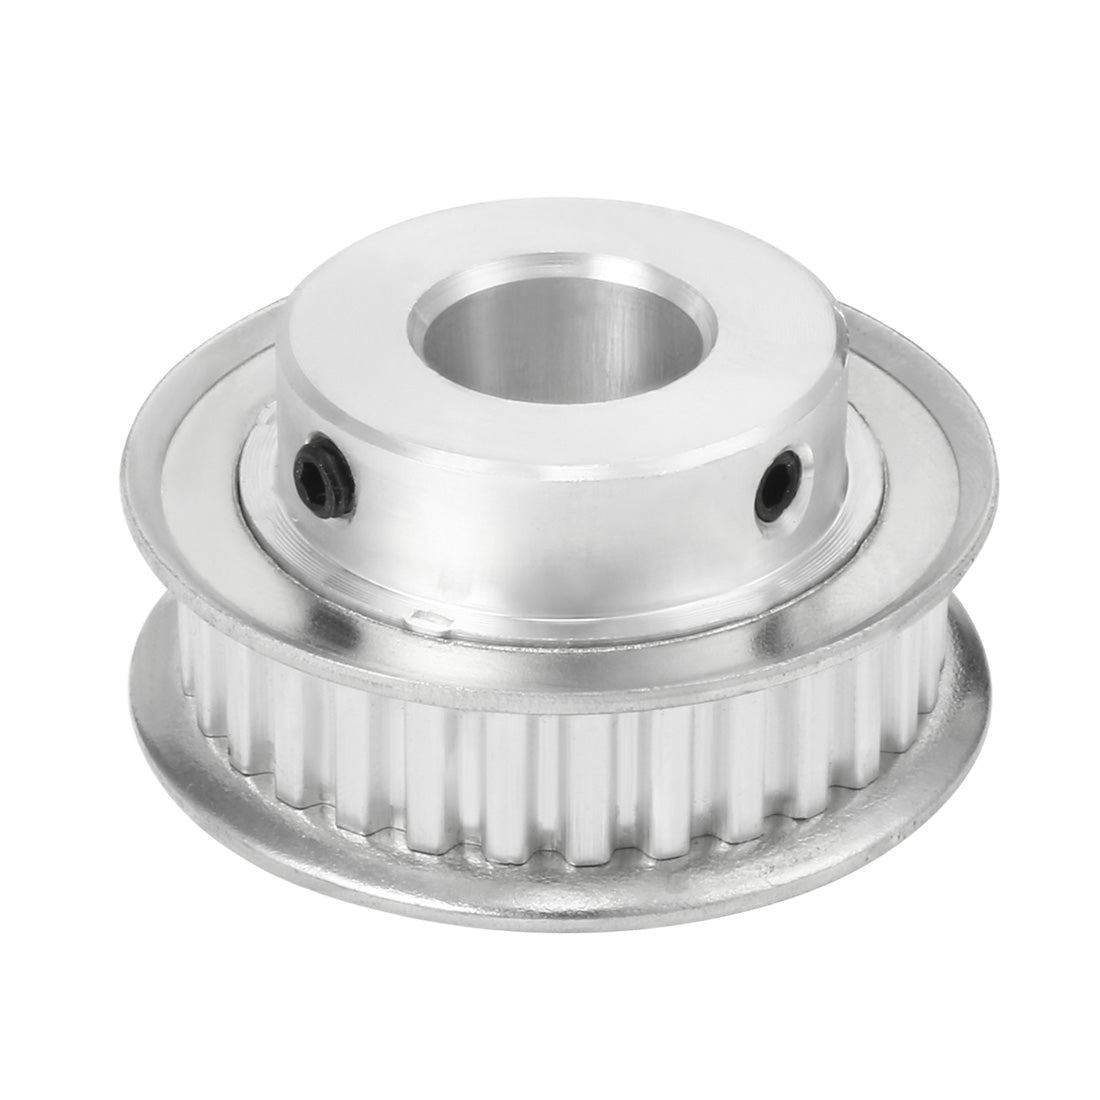 uxcell Uxcell Aluminum XL 30 Teeth 17mm Bore Timing Belt Idler Pulley Flange Synchronous Wheel for 10mm Belt 3D Printer CNC